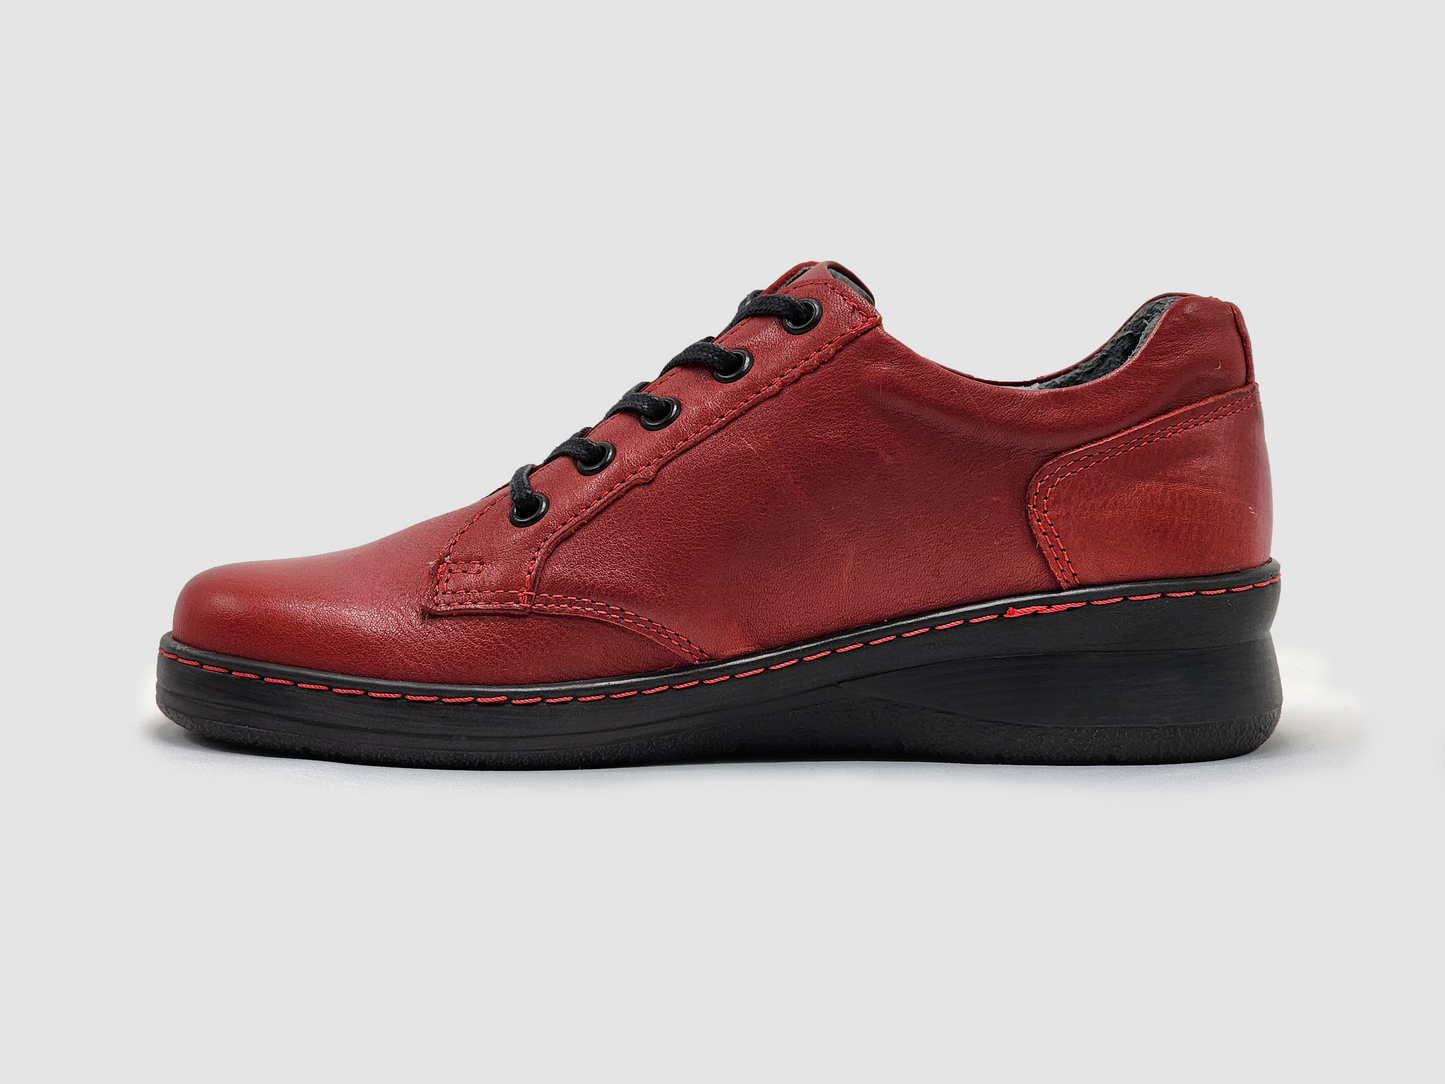 Women's Dr Wellness Zip-Up Leather Shoes - Red - Kacper Global Shoes 